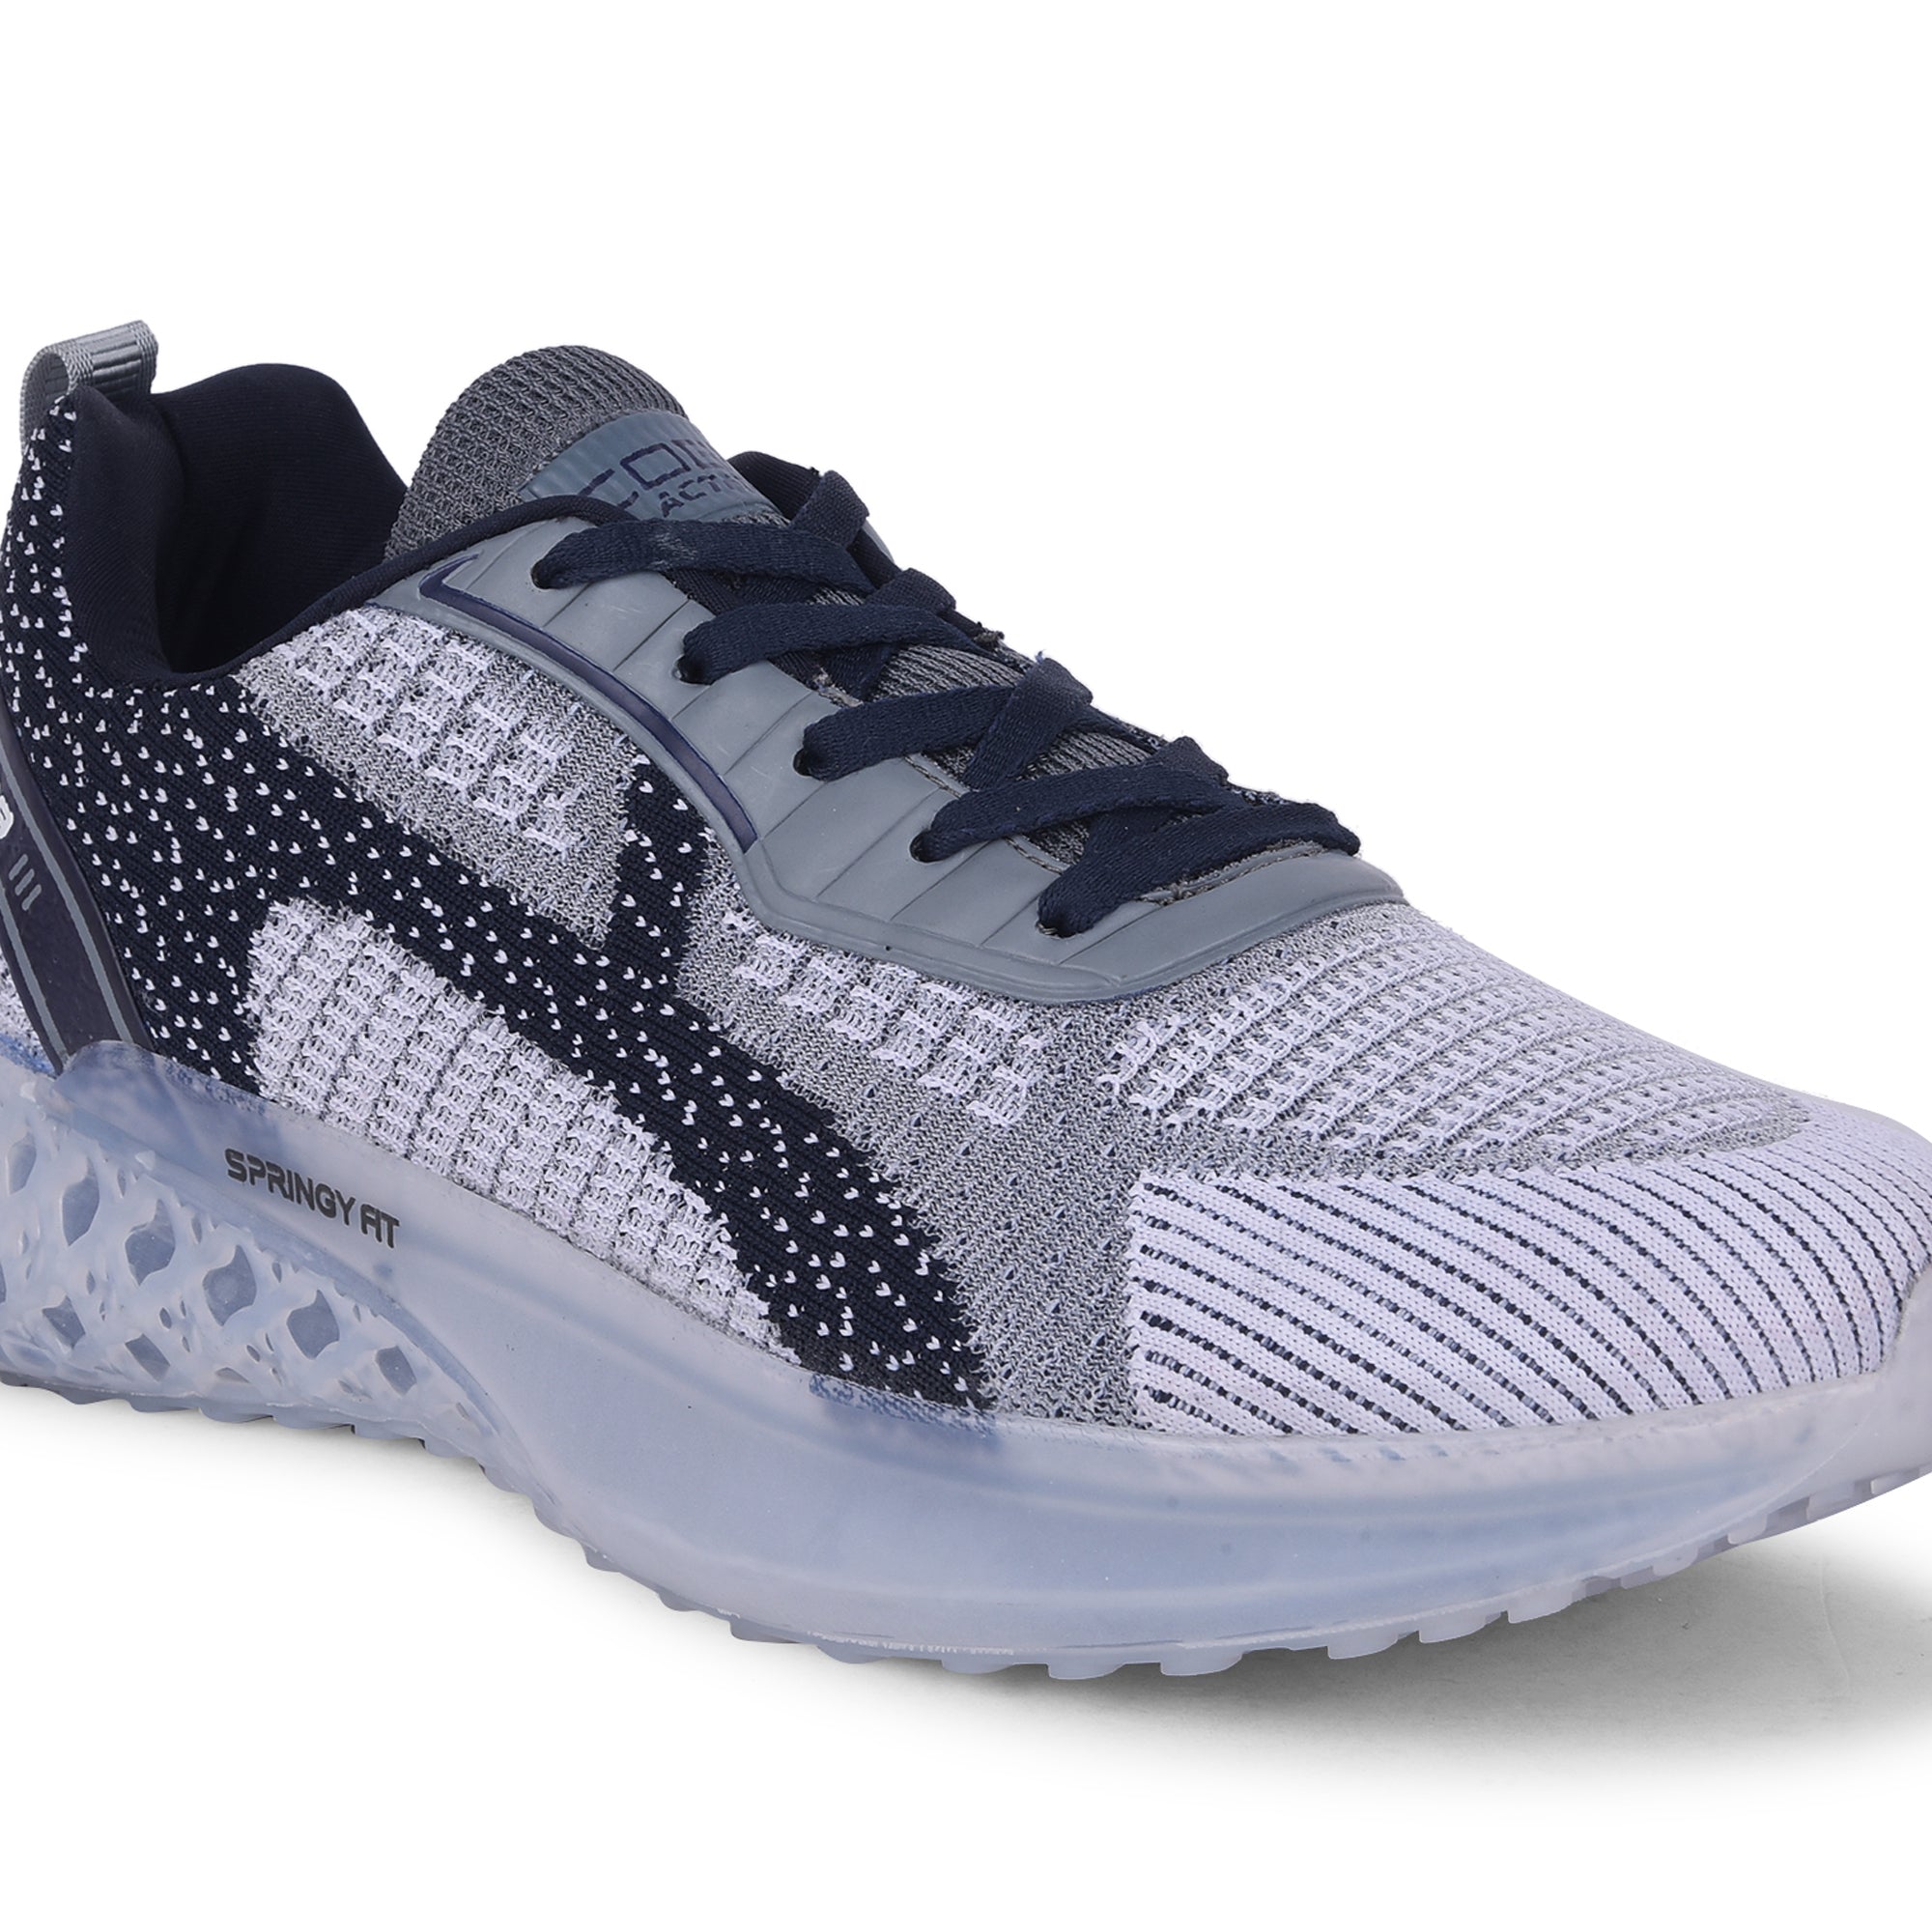 cobb springy fit navy white men's running shoes